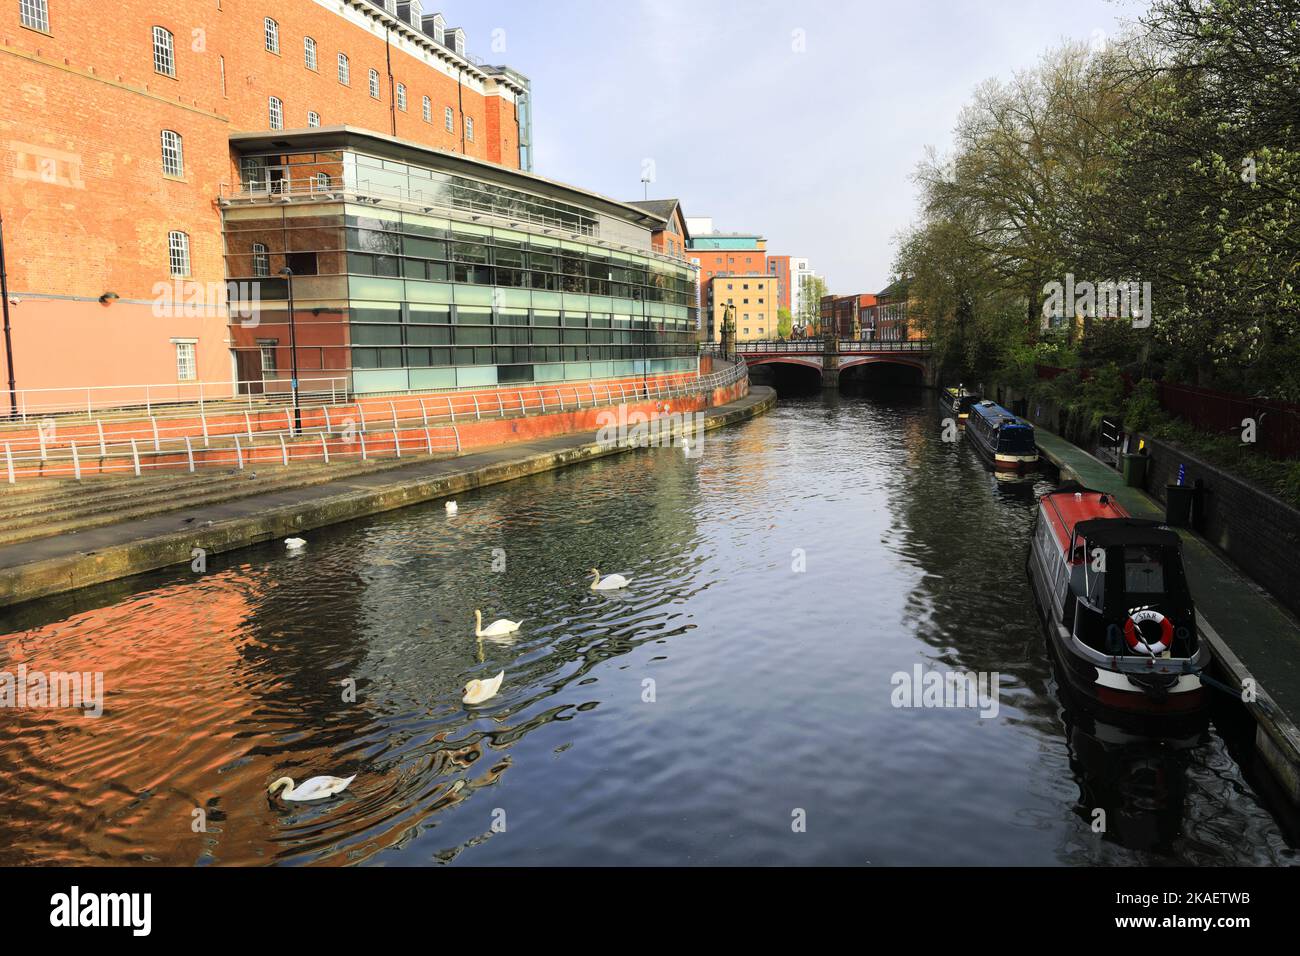 Buildings alongside the river Soar, Leicester City, Leicestershire, England; Britain; UK Stock Photo